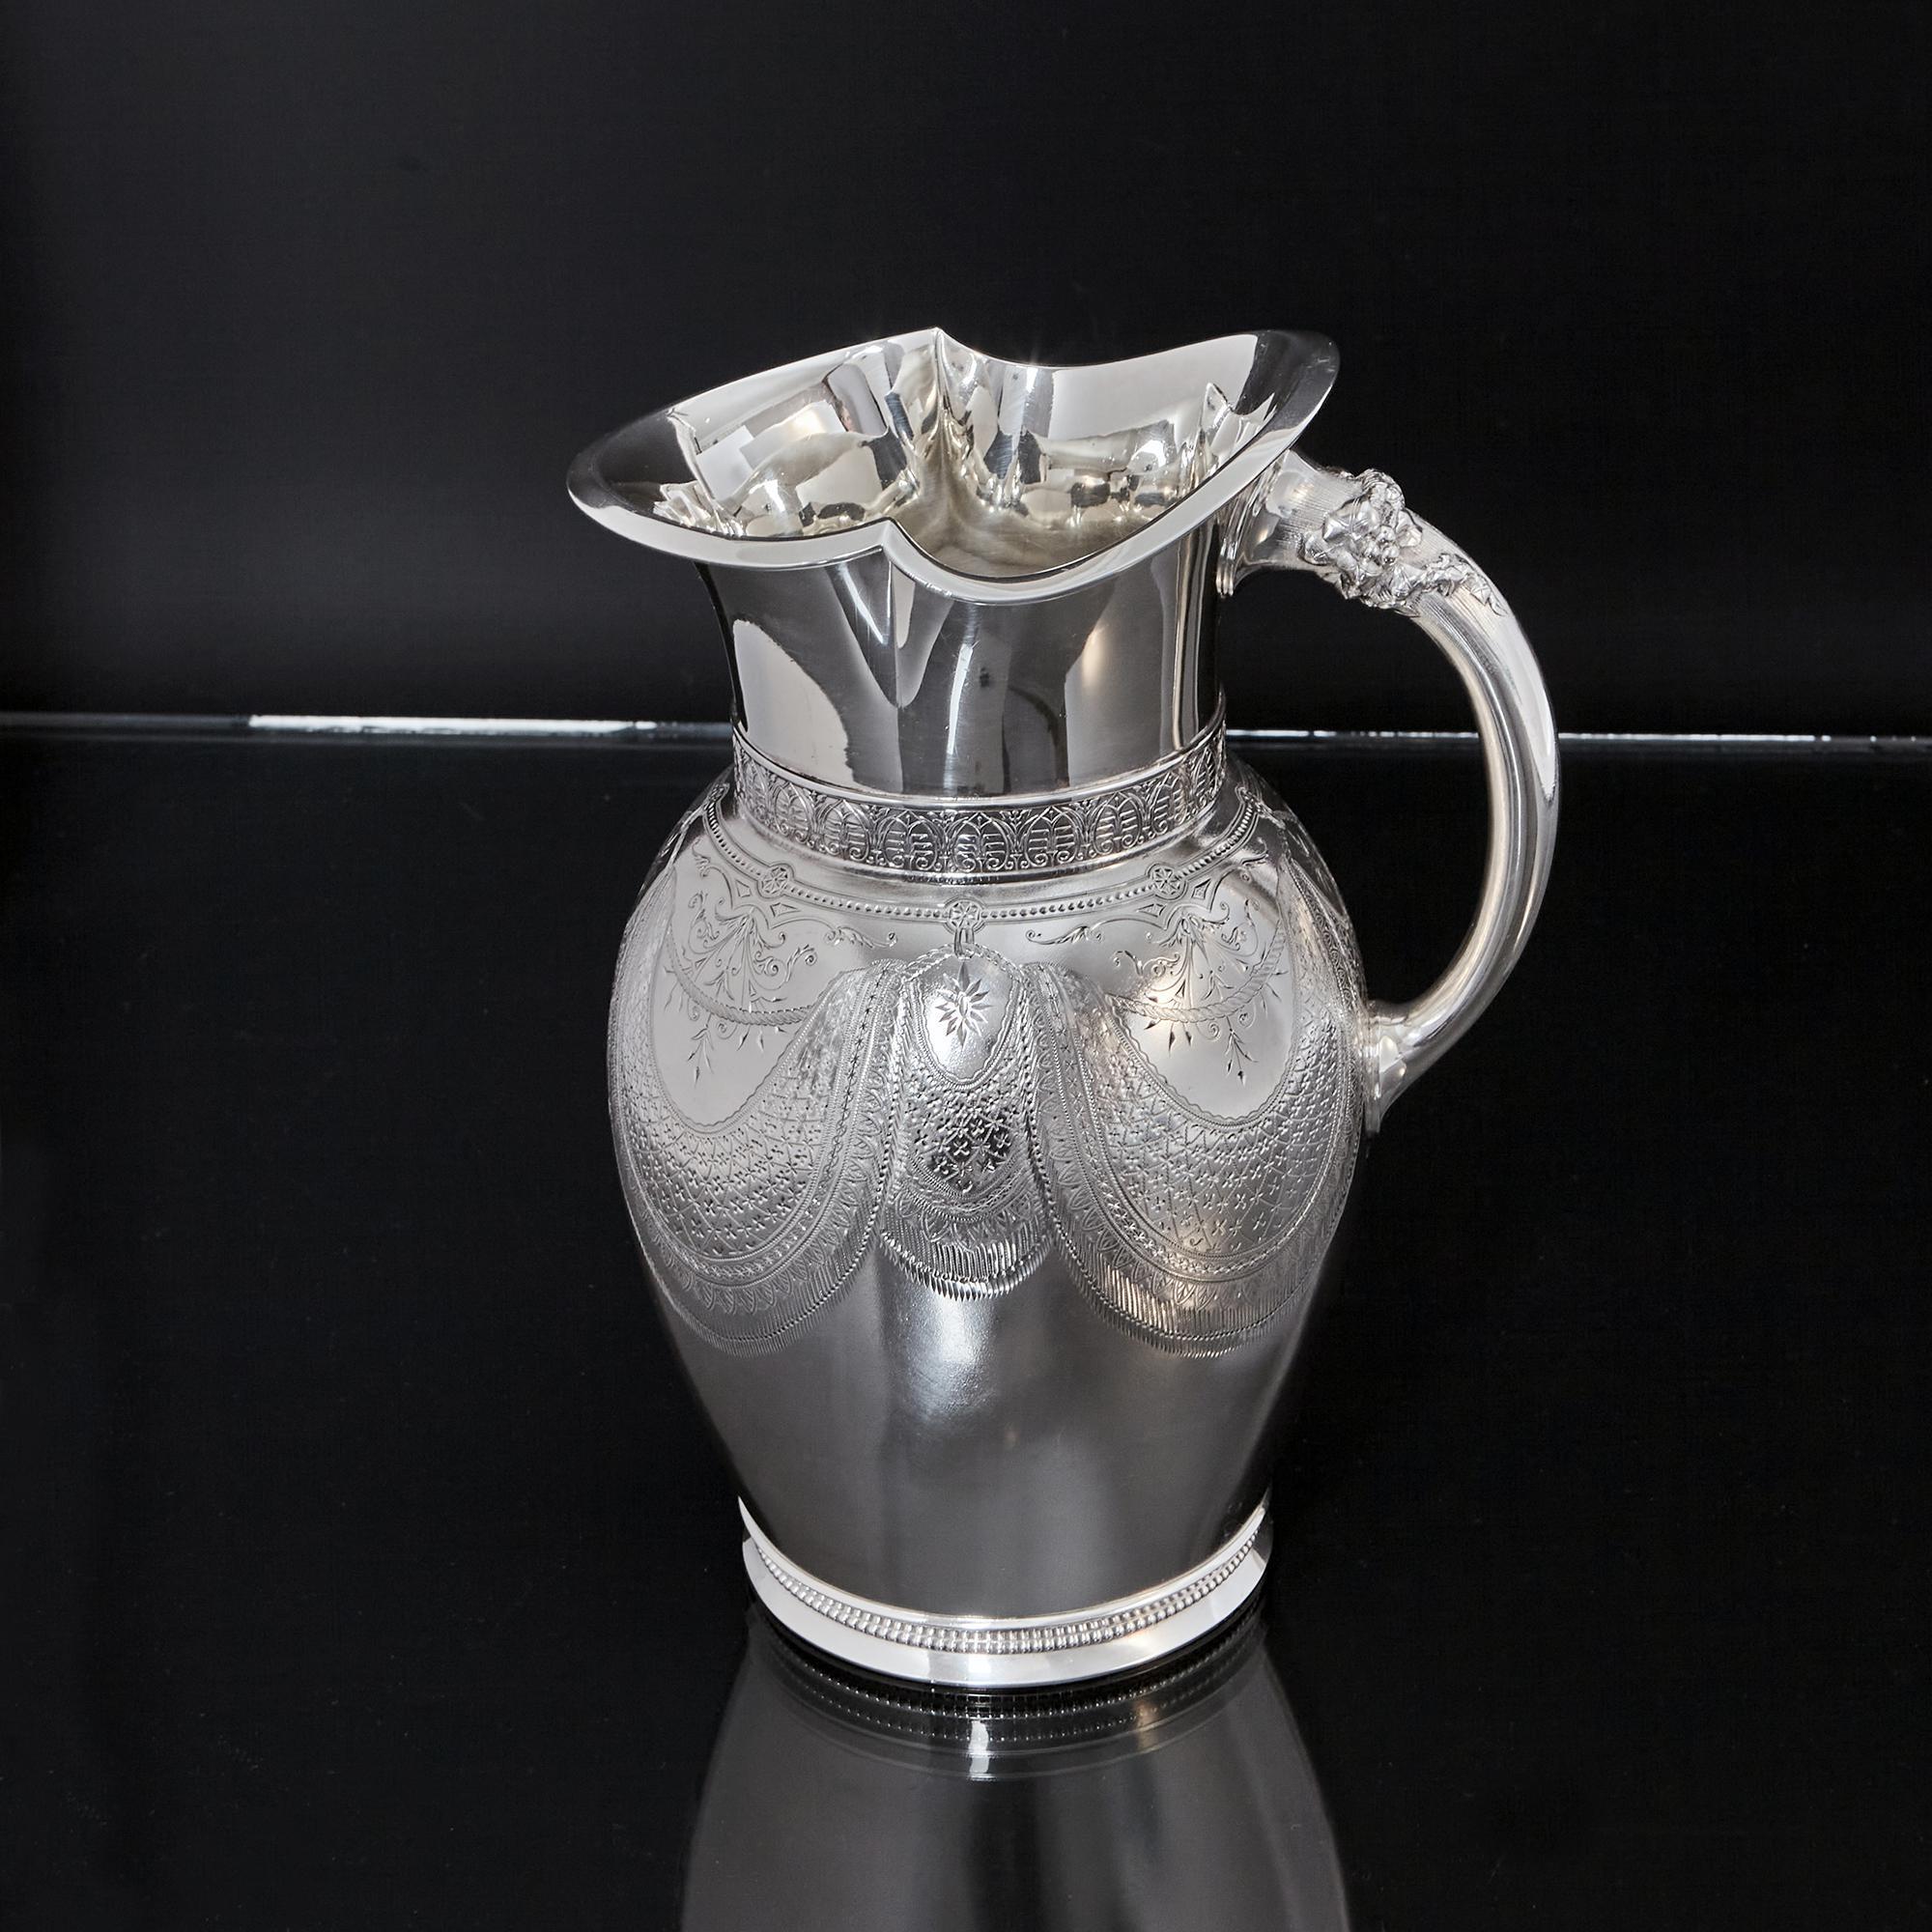 Beautifully crafted antique American sterling silver water jug in the Aesthetic style, with a frosted surface decorated with the most delicate hand-engraved swags supported by rope held in place with links. Between the swags are sections of trailing